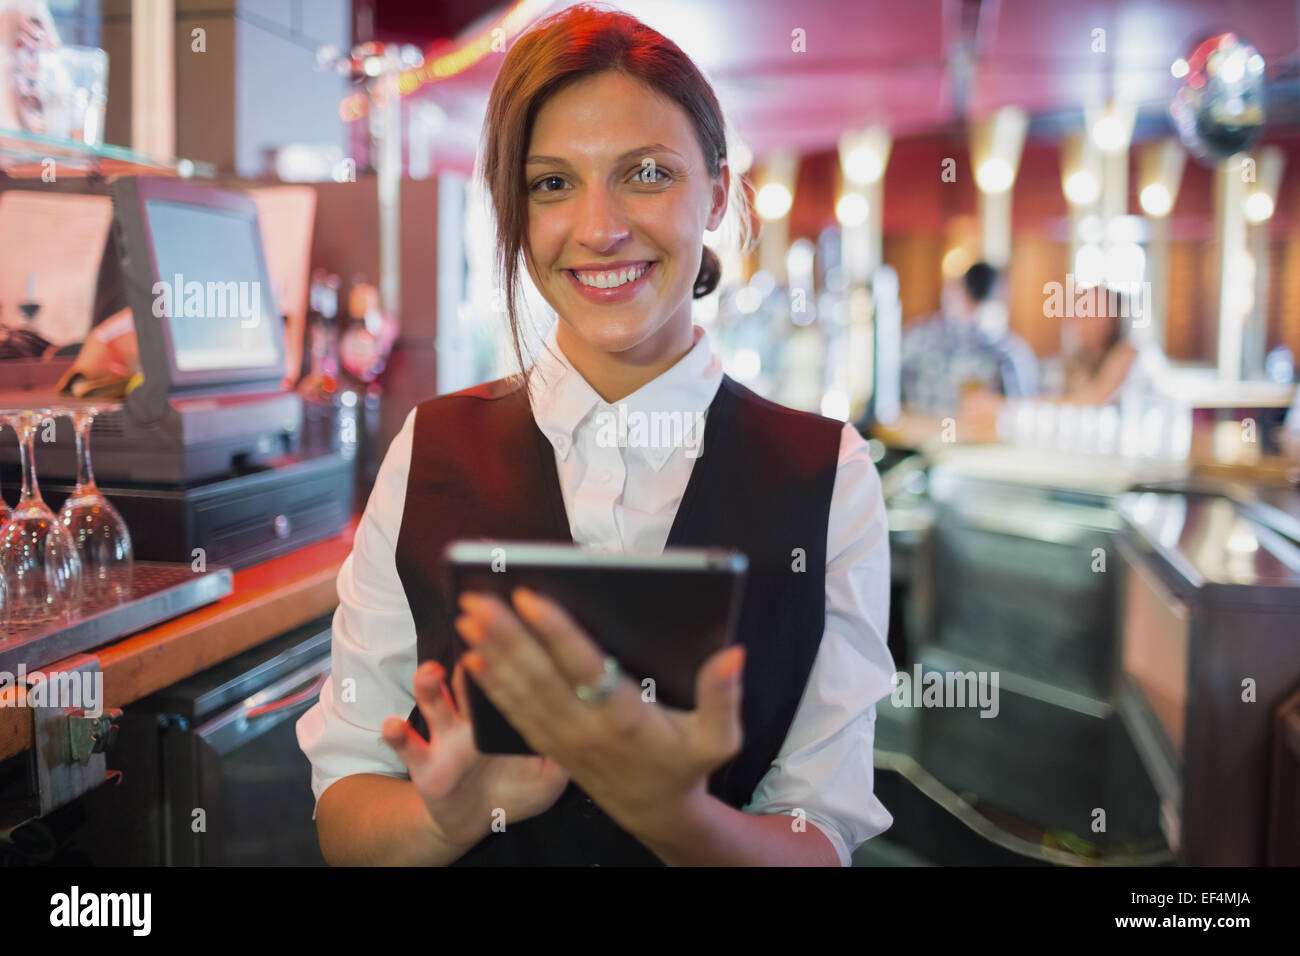 Focused barmaid using touchscreen till Stock Photo